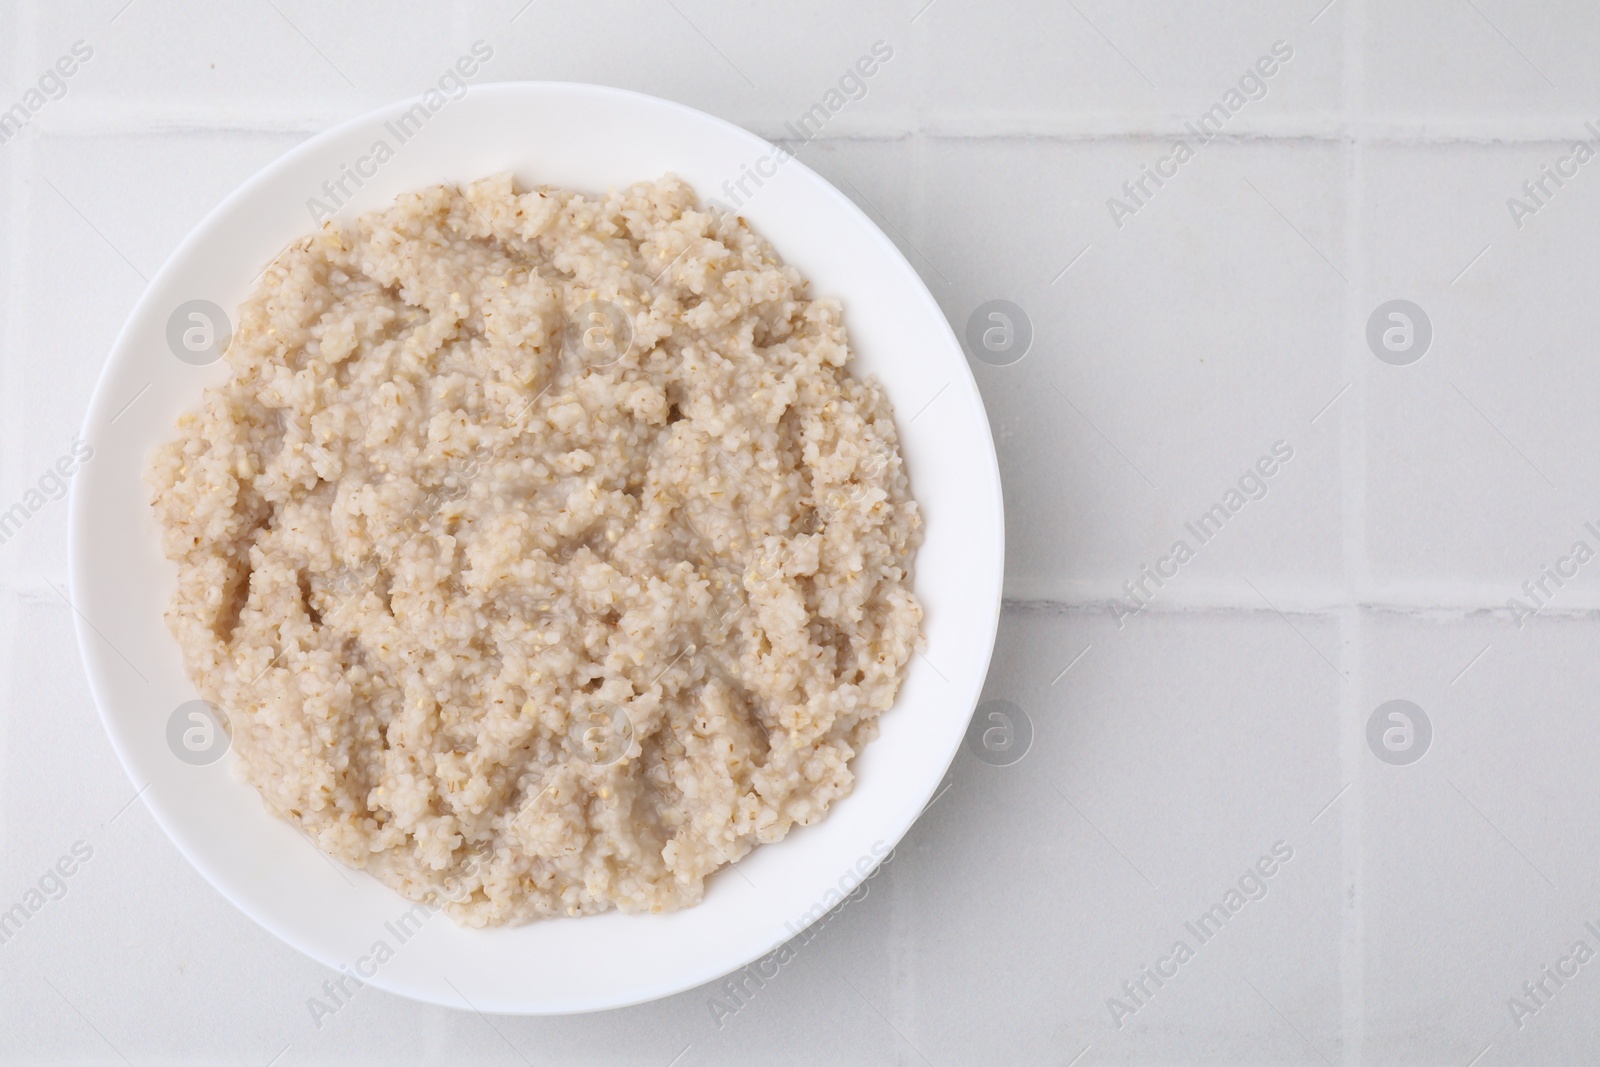 Photo of Delicious barley porridge in bowl on white tiled table, top view. Space for text